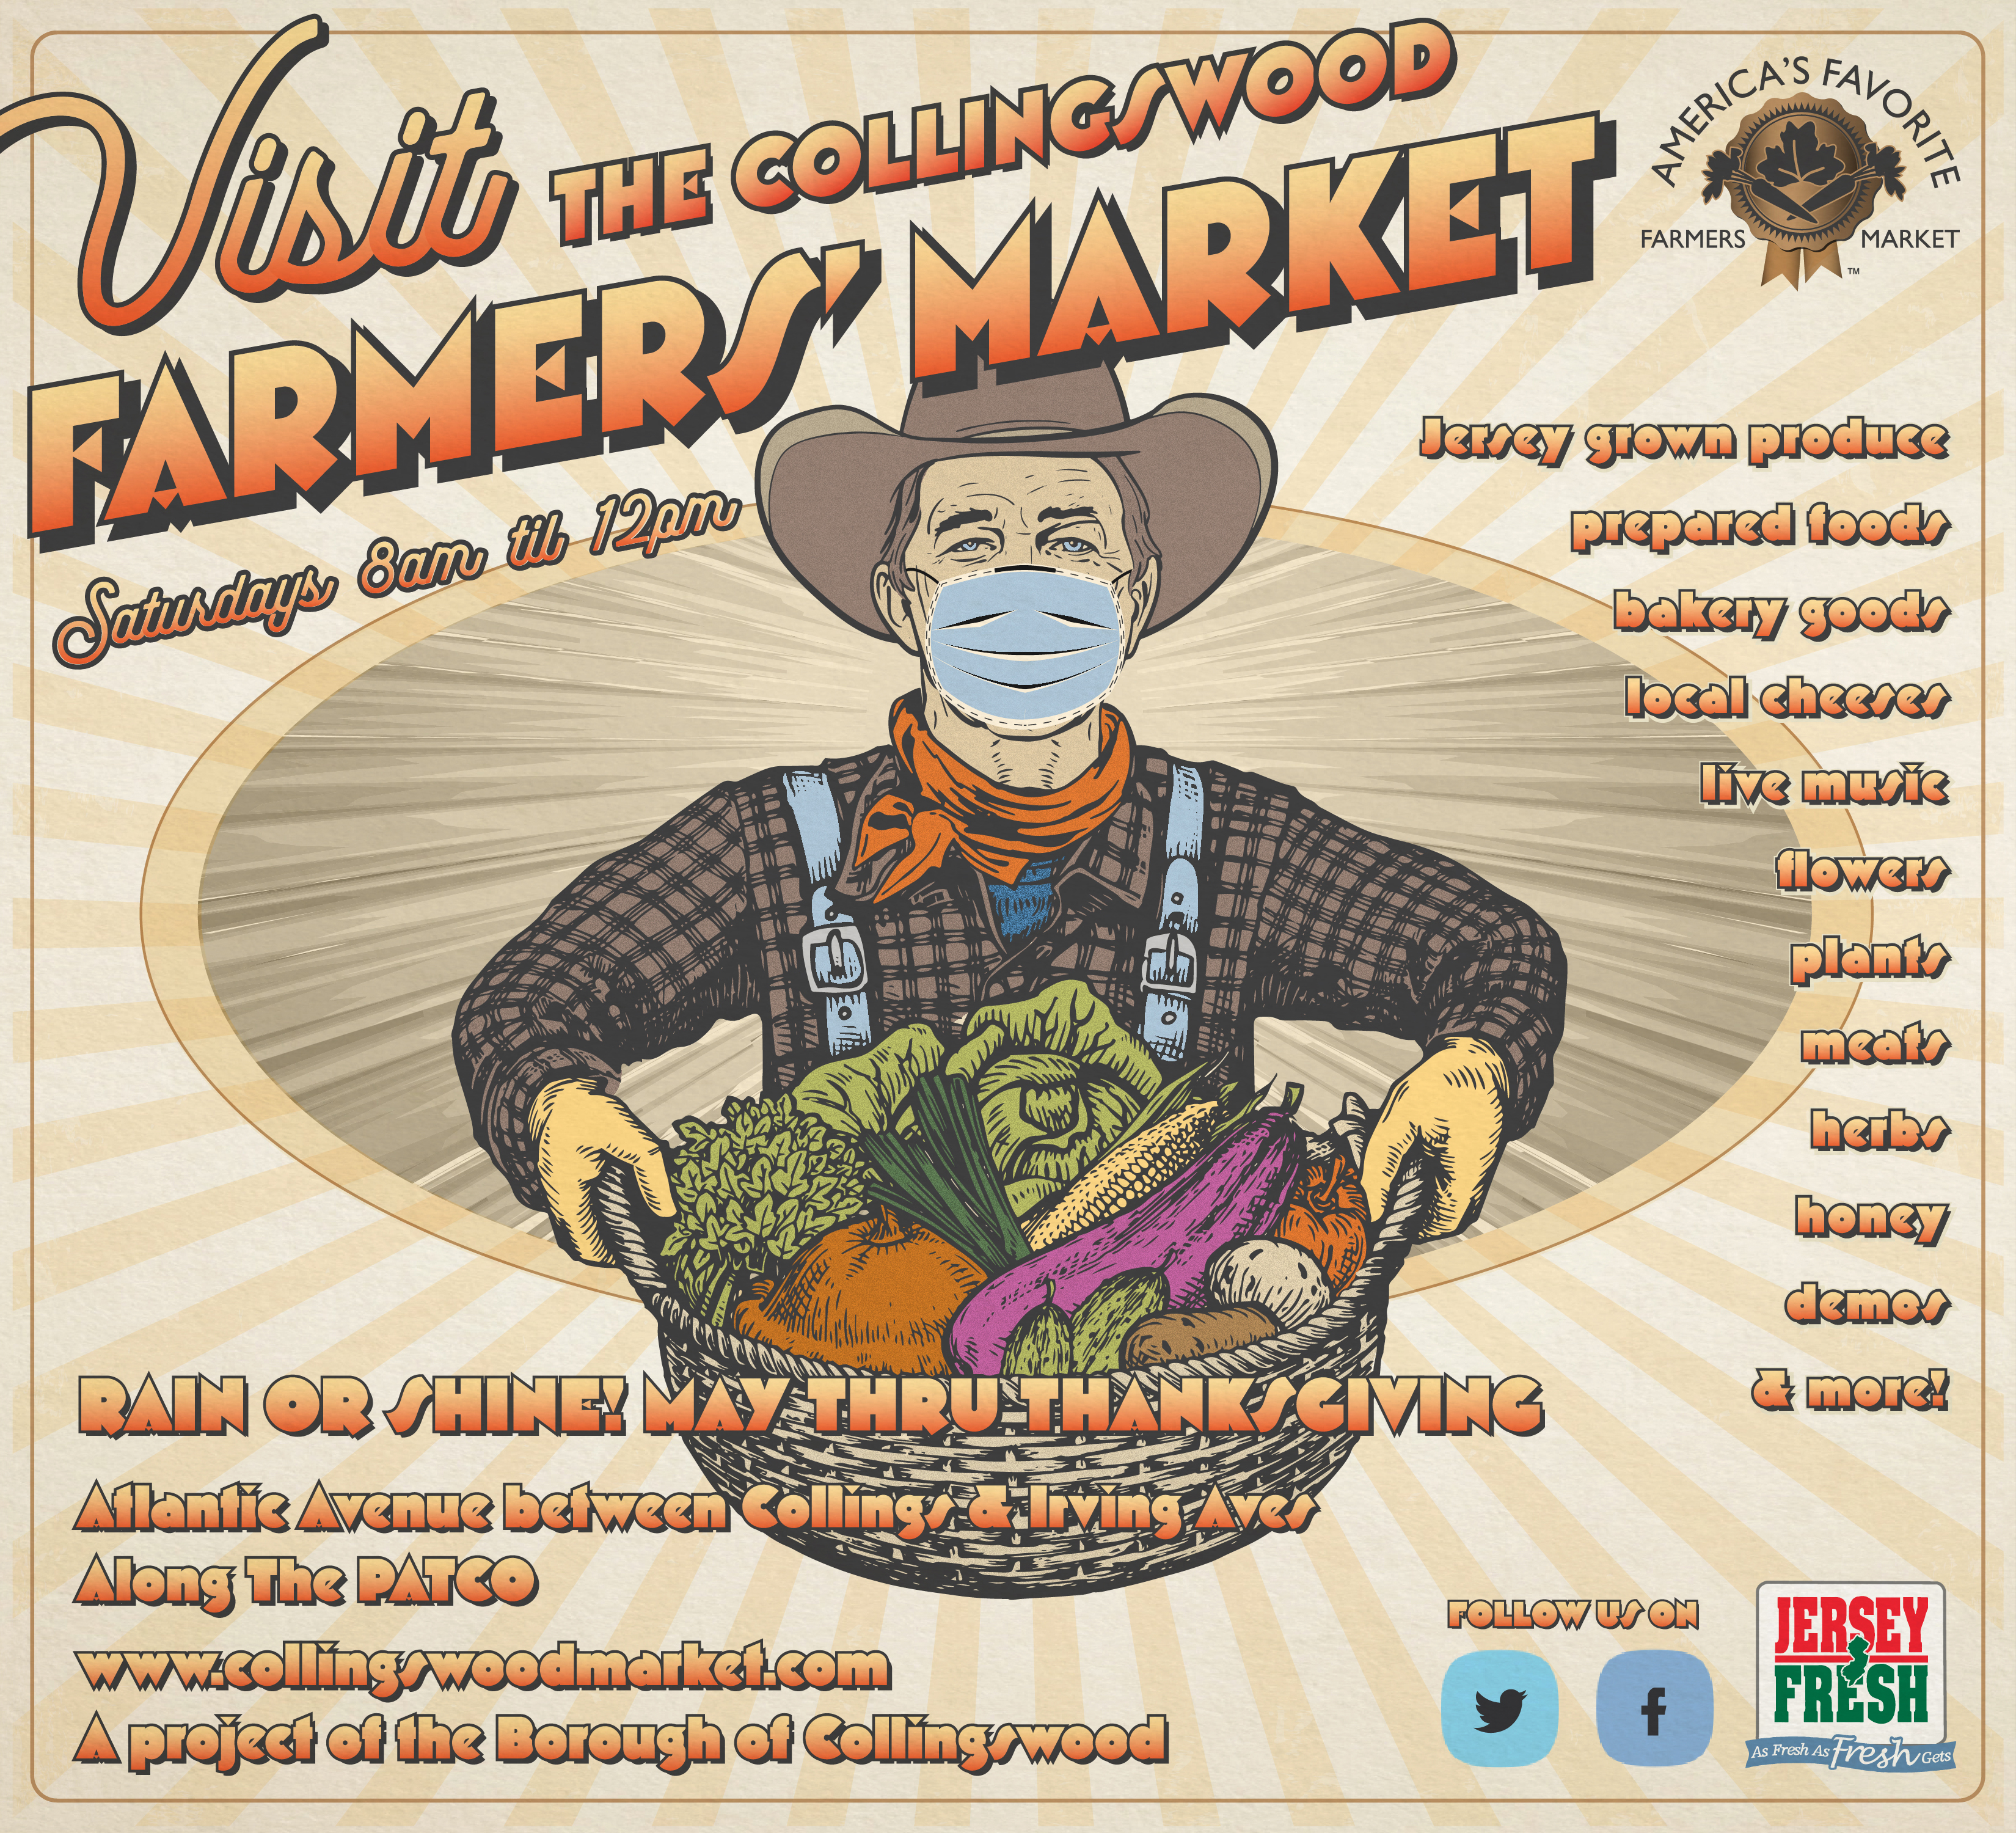 01_Scarlet_Rowe_Image_And_Design_Poster_Farmers_Market_2021_11X10